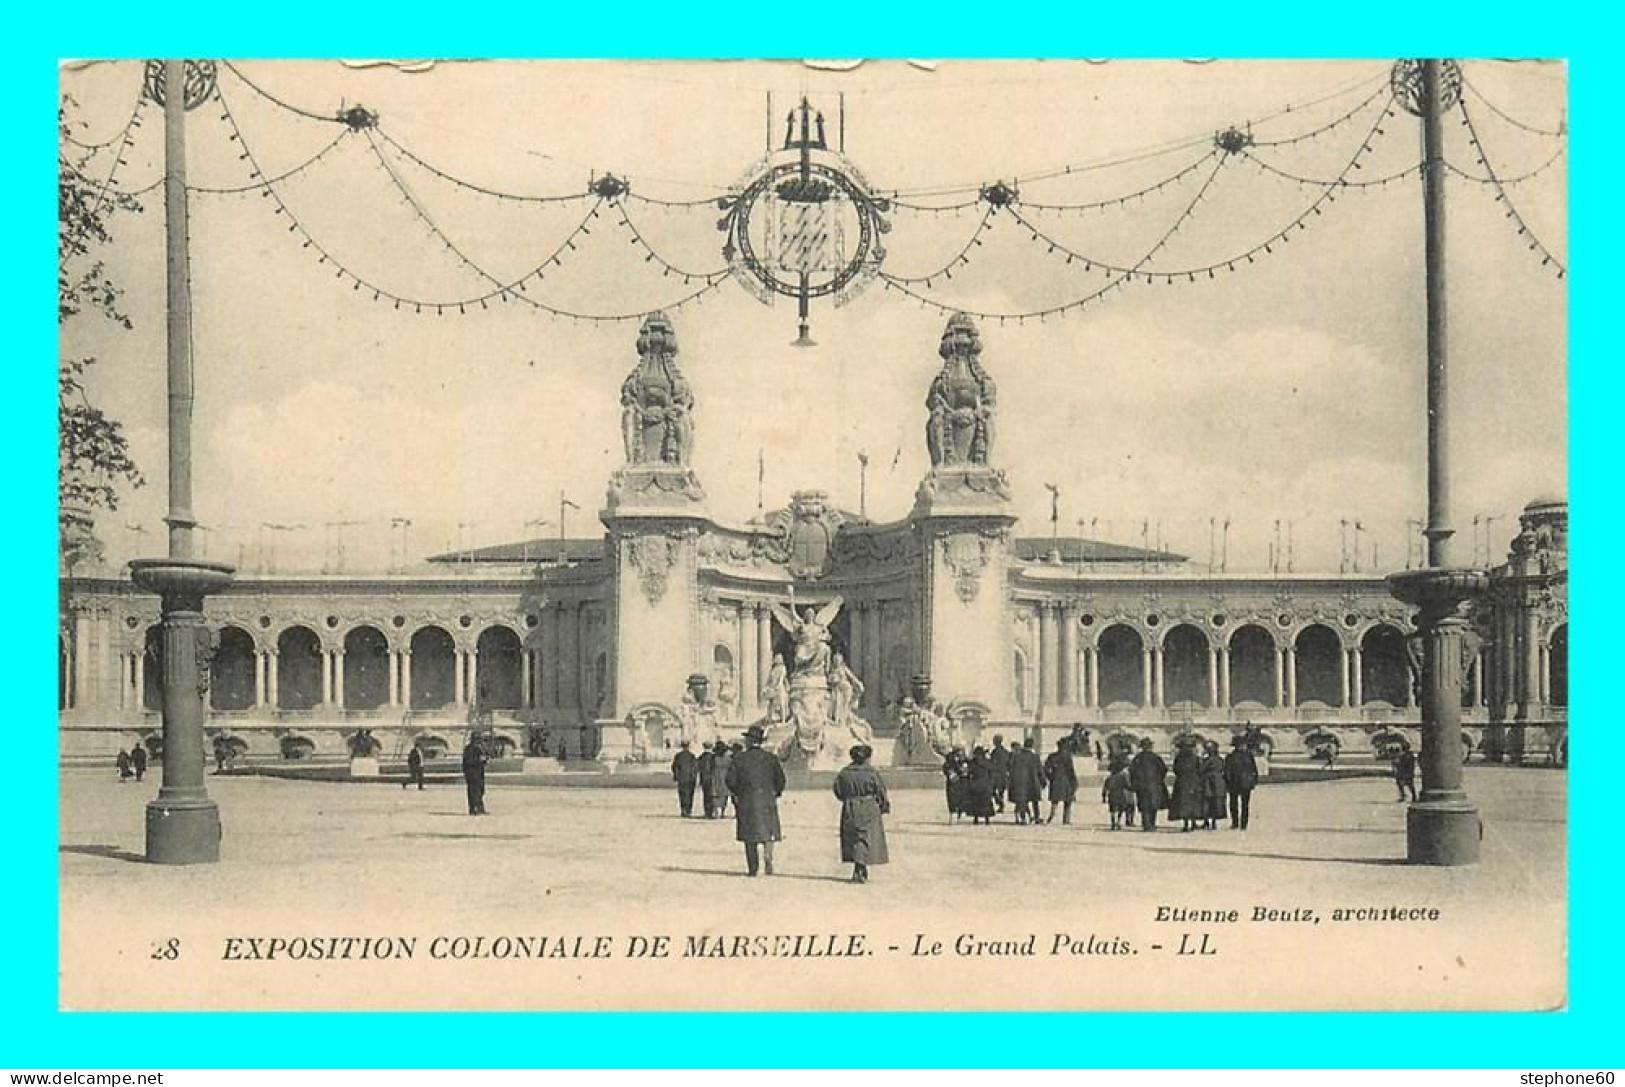 A832 / 531 13 - MARSEILLE Exposition Coloniale Le Grand Palais - Expositions Coloniales 1906 - 1922